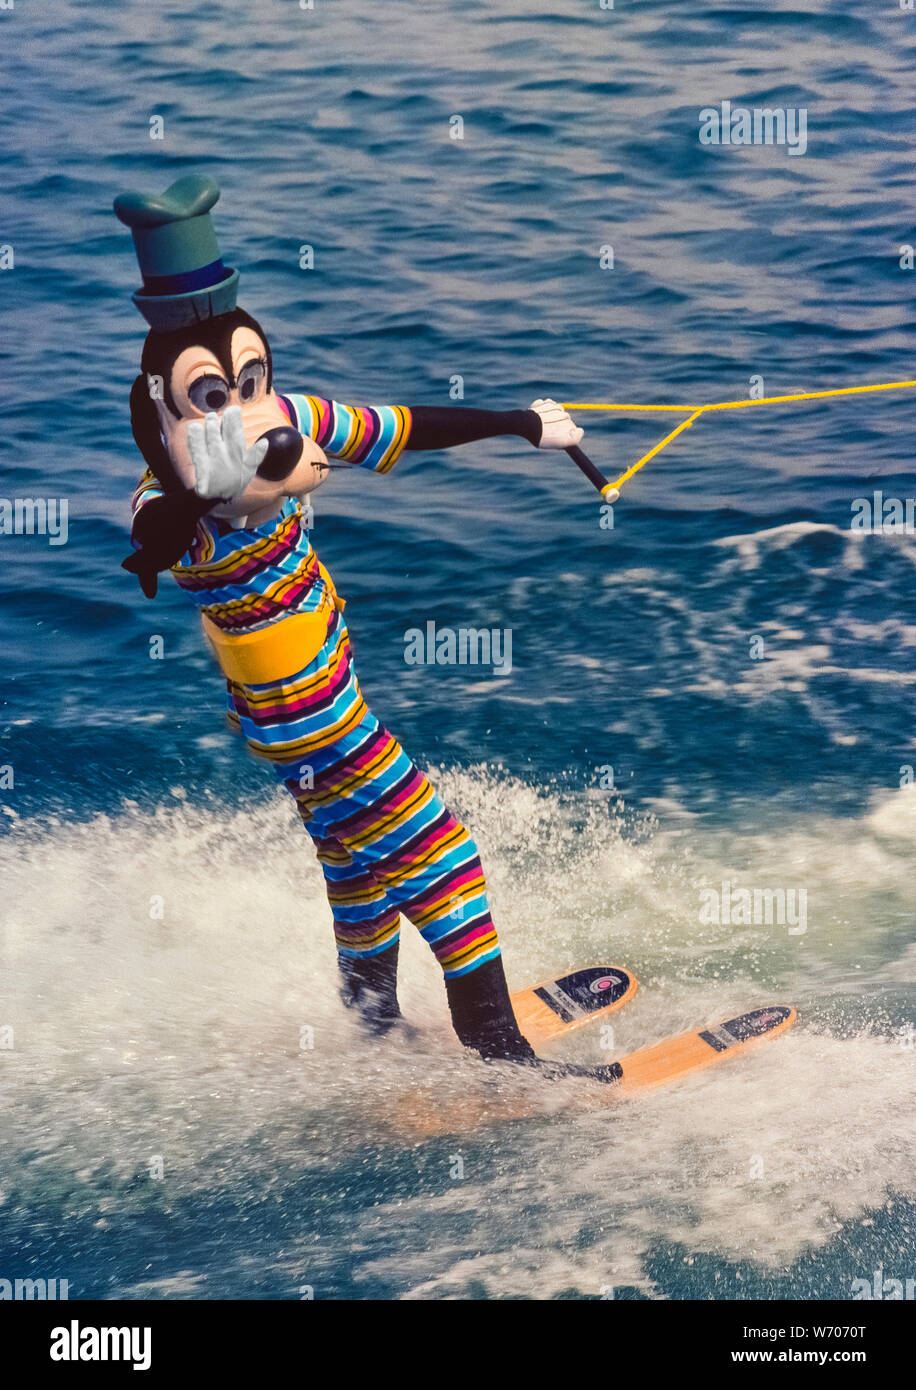 Goofy, one of Walt Disney's best known animal cartoon characters, performs on water skis for visitors at Walt Disney World, the famous amusement park near Orlando, Florida, USA. Created in the 1930s for Disney's animated cartoons, Goofy is a tall, human-like dog who is a close friend of Mickey Mouse and Donald Duck. Since opening in 1971, Disney World has become an icon of American culture and is now the most popular vacation resort in the world with more than 52 million visitors annually. Stock Photo